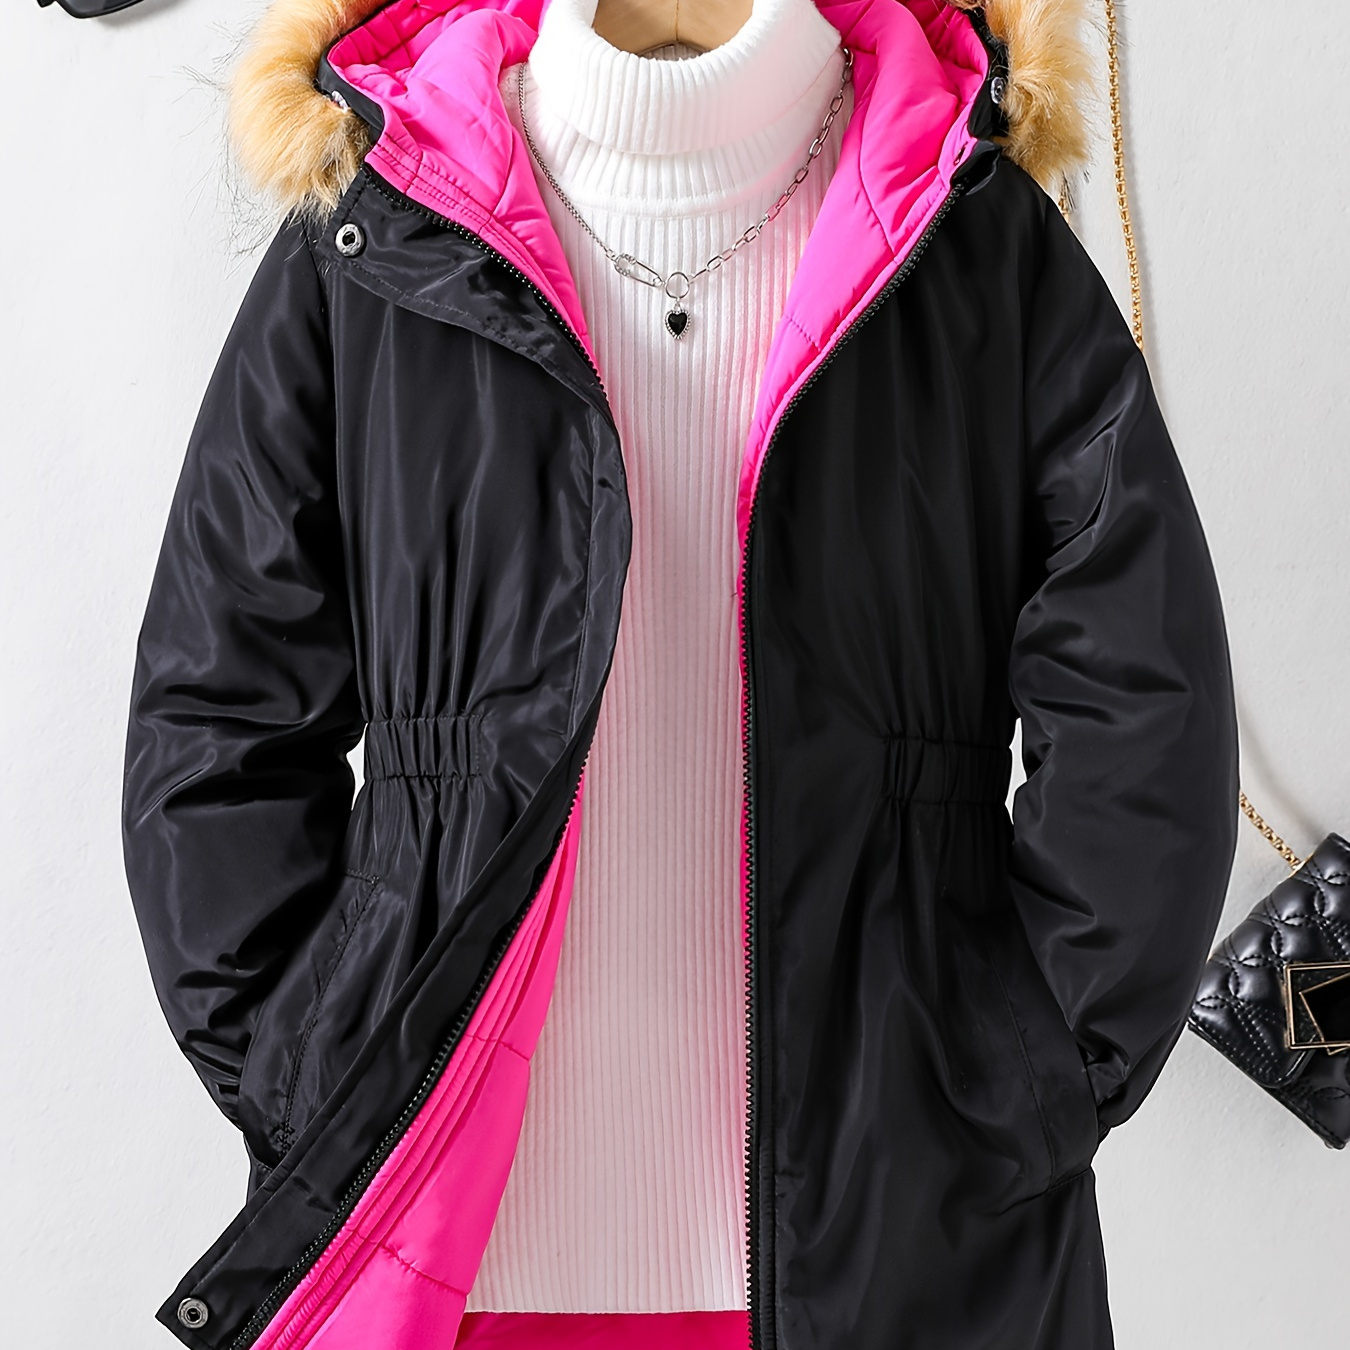 

Girls Waterproof Contrast Lining Cotton-padded Hooded Collar Long Tunic Jacket Coat Parkas For Outdoor, Teen Kids Winter Clothes